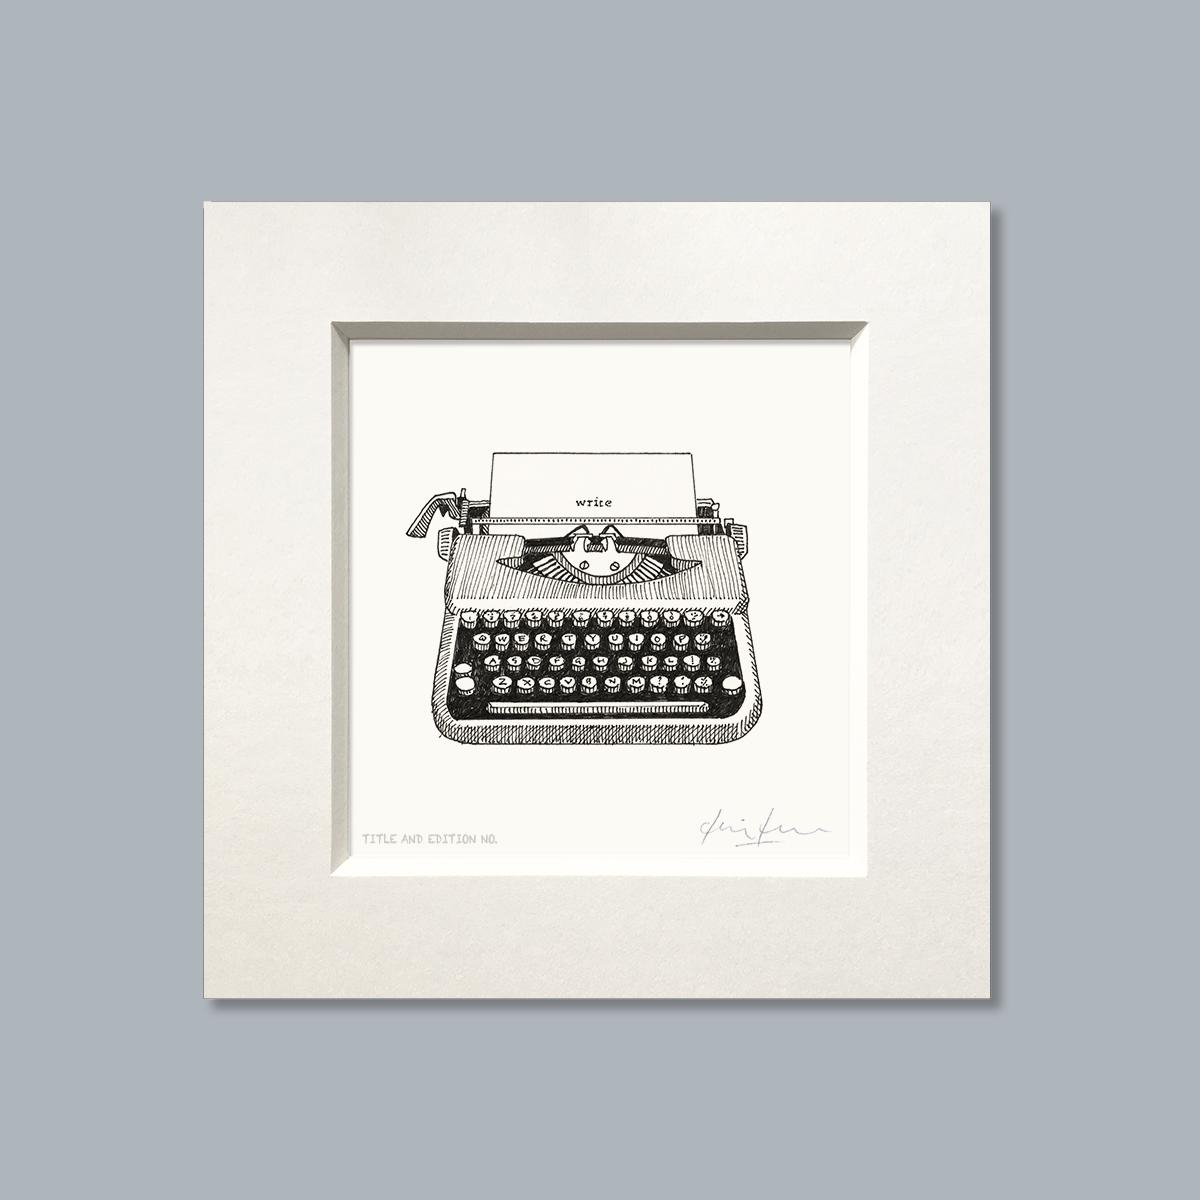 Limited edition print from pen and ink drawing of an old typewriter with the word 'write' in a white mount